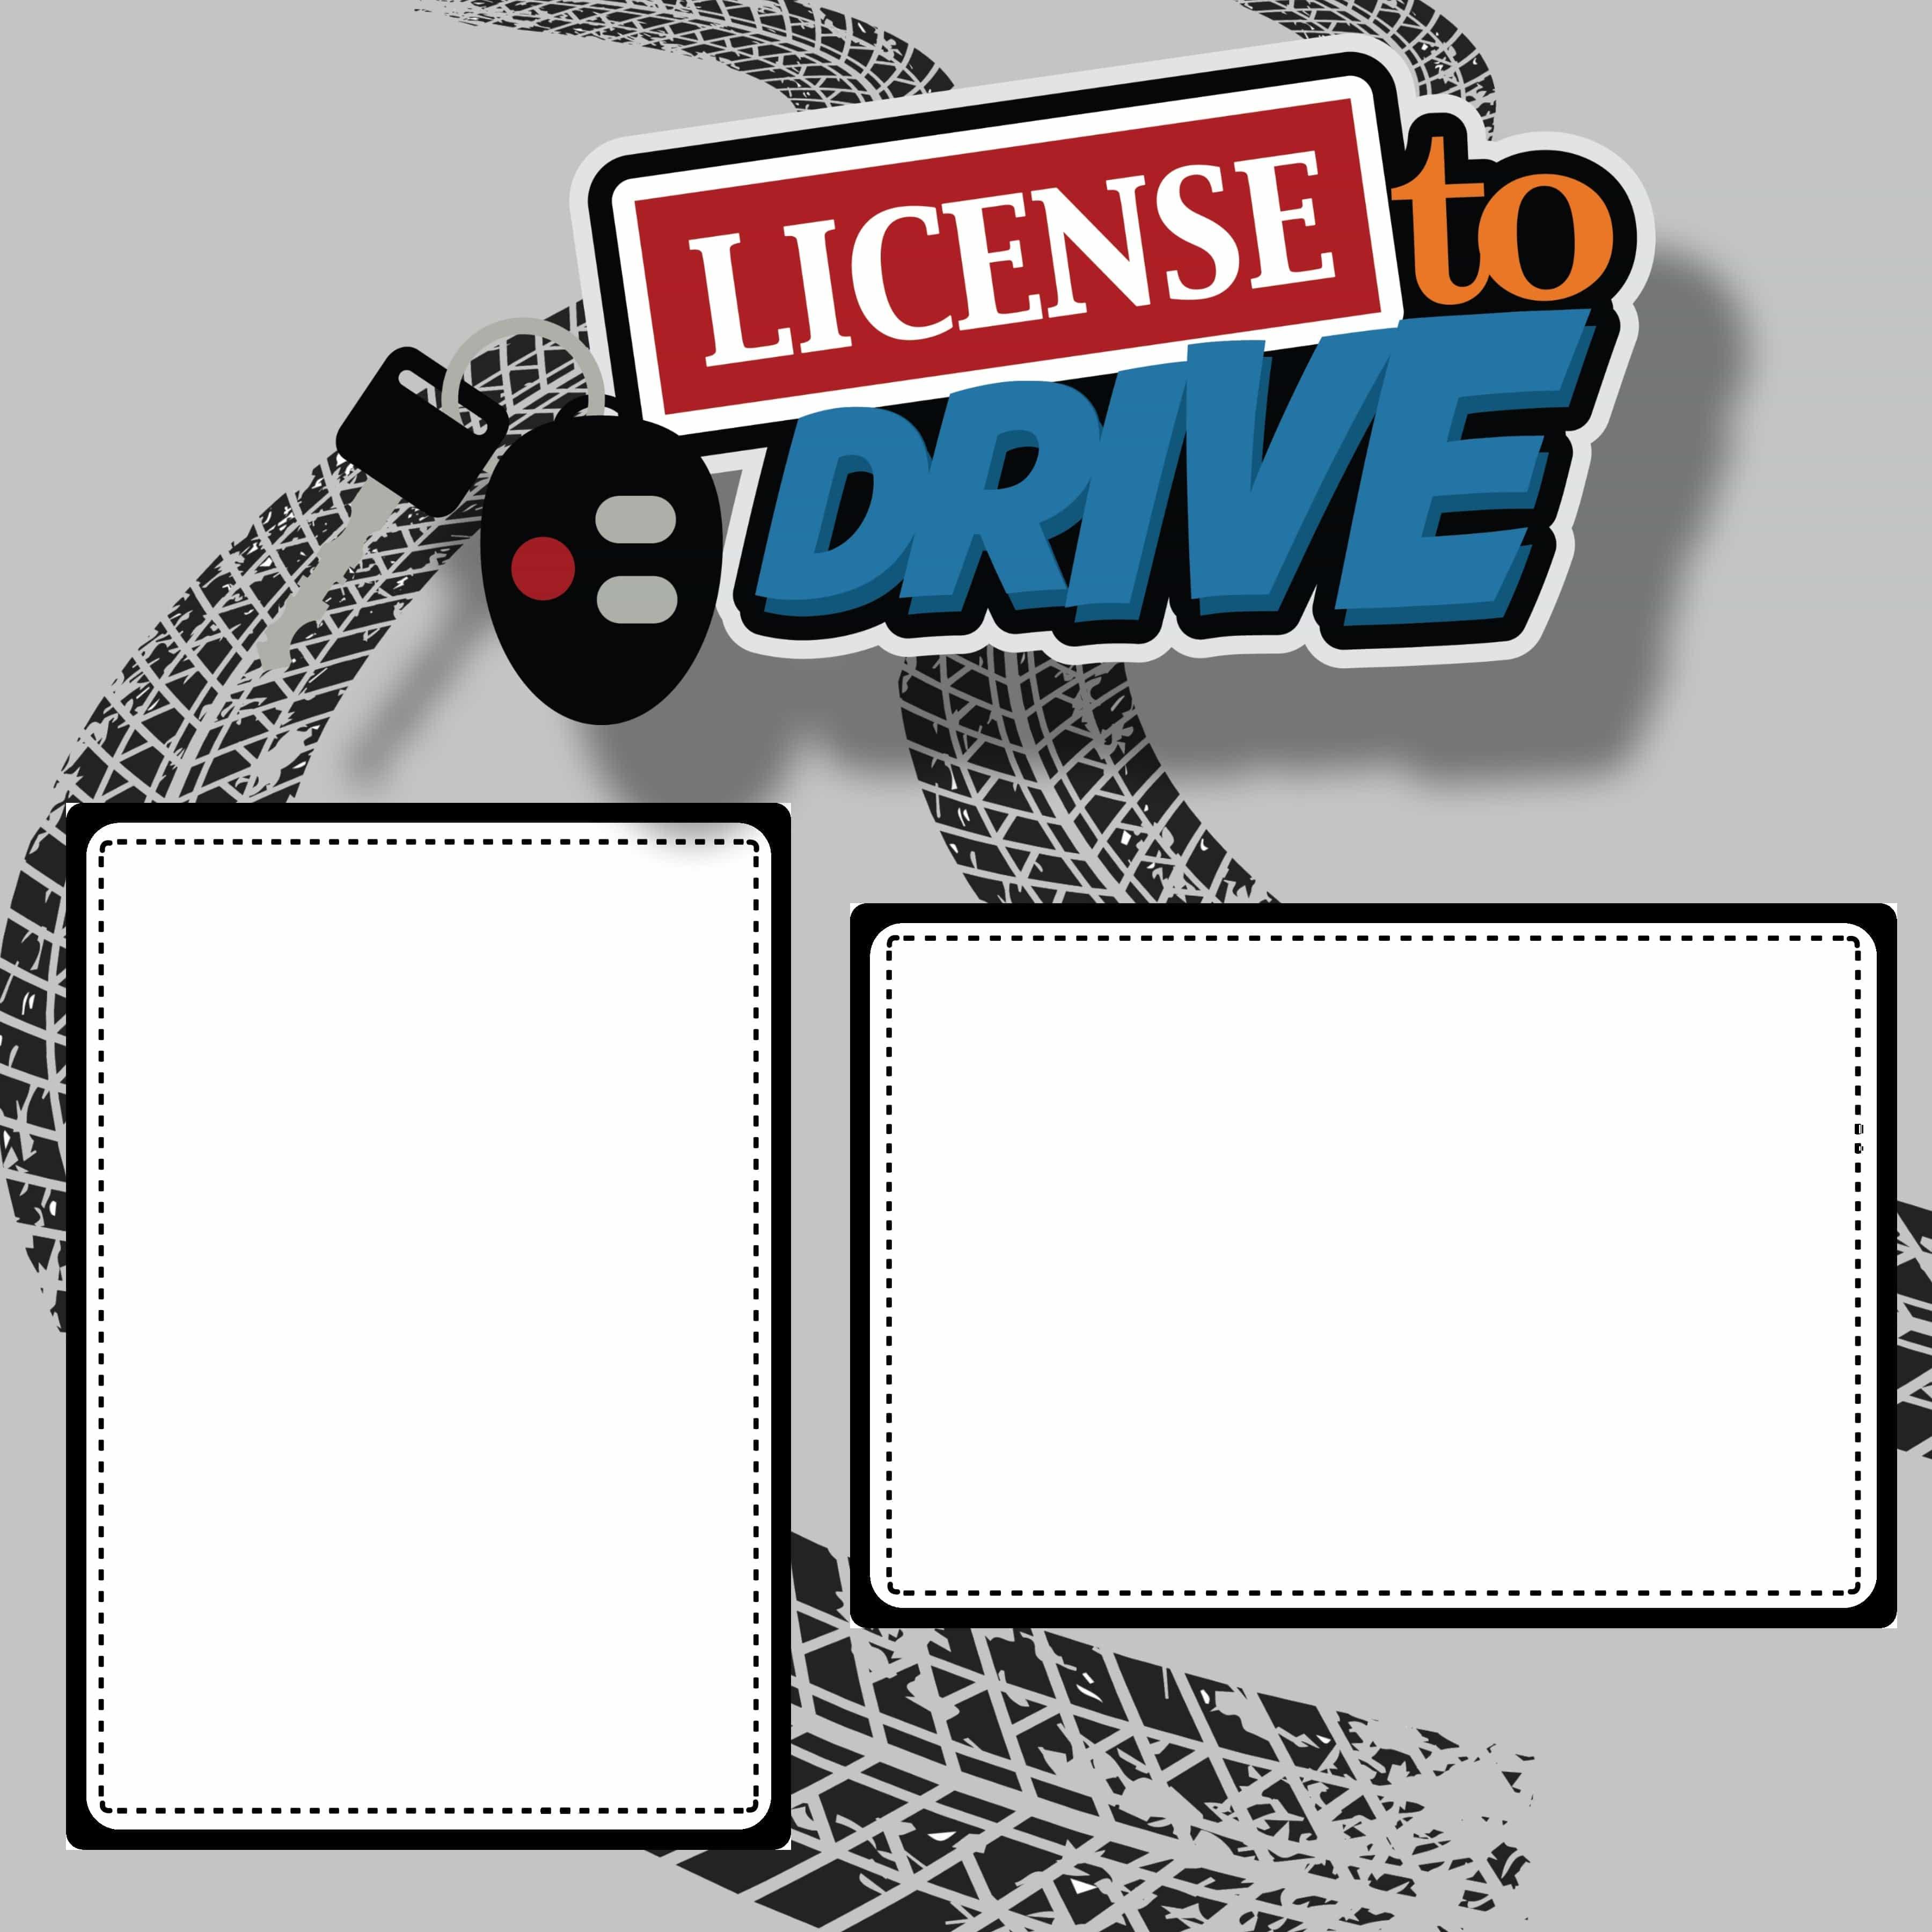 License To Drive Student Driver (2) - 12 x 12 Premade, Printed Scrapbook Pages by SSC Designs - Scrapbook Supply Companies